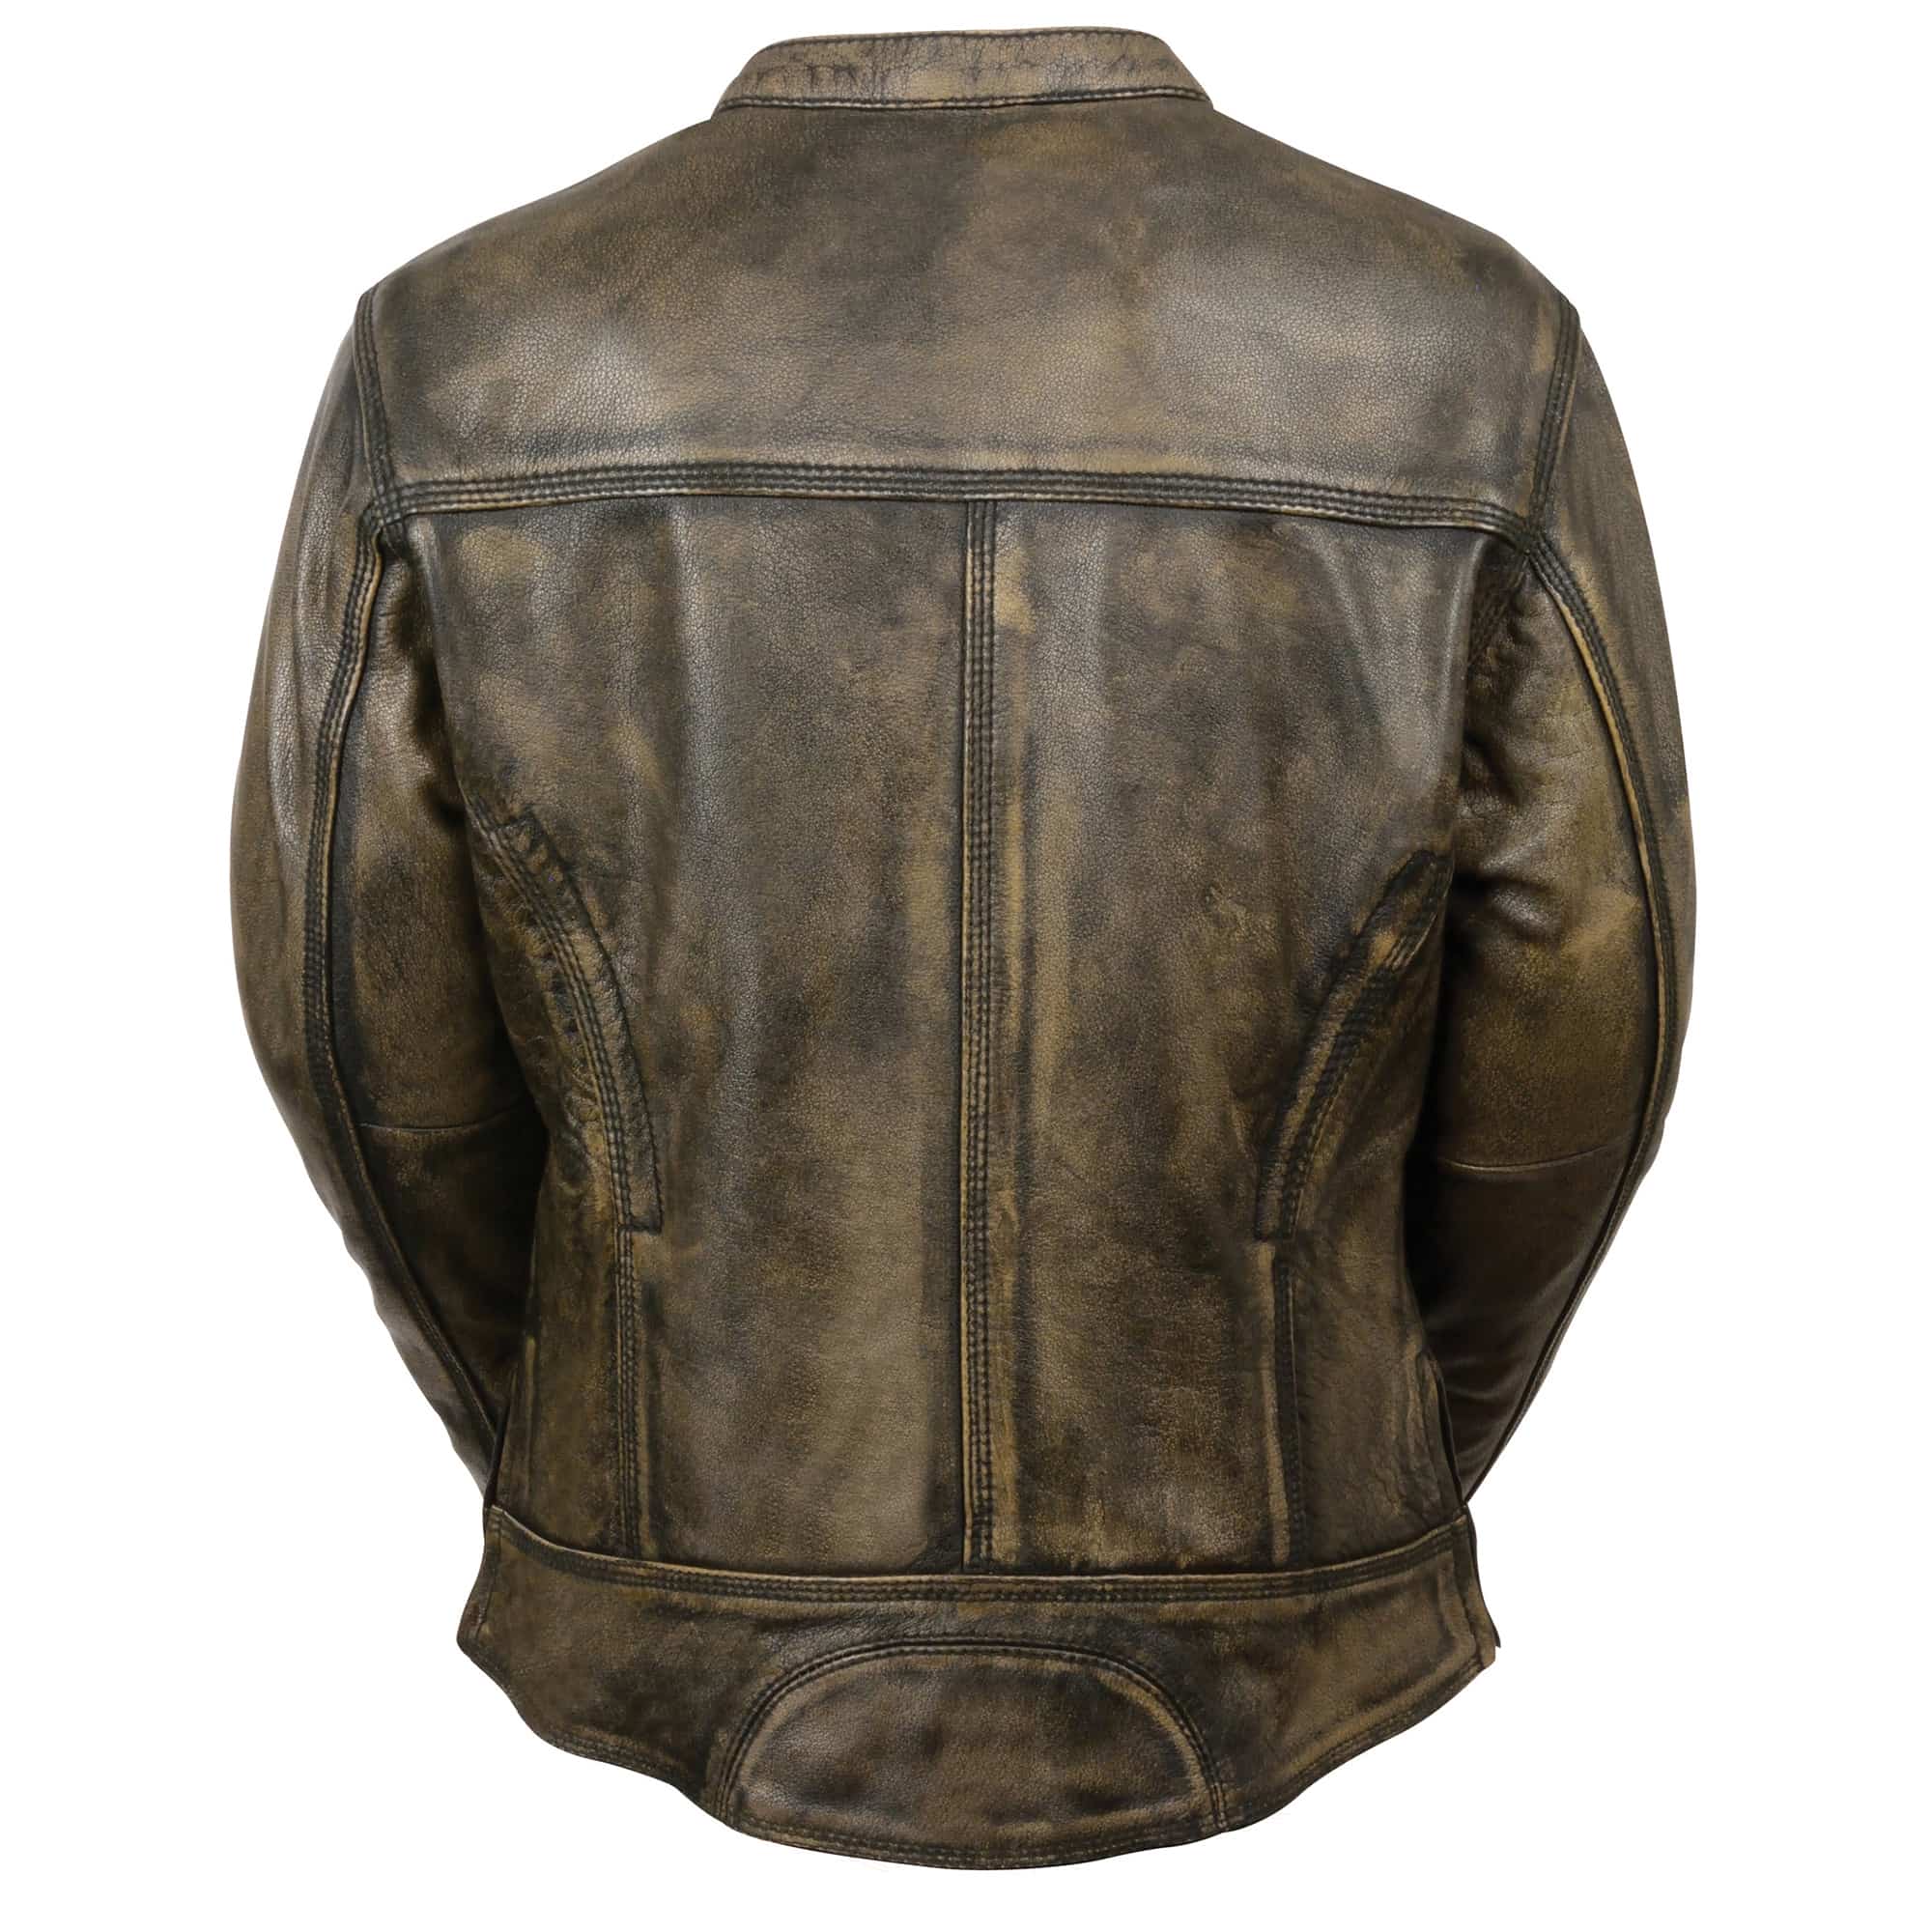 Women’s Brown Distressed Scooter Jacket w/ Venting